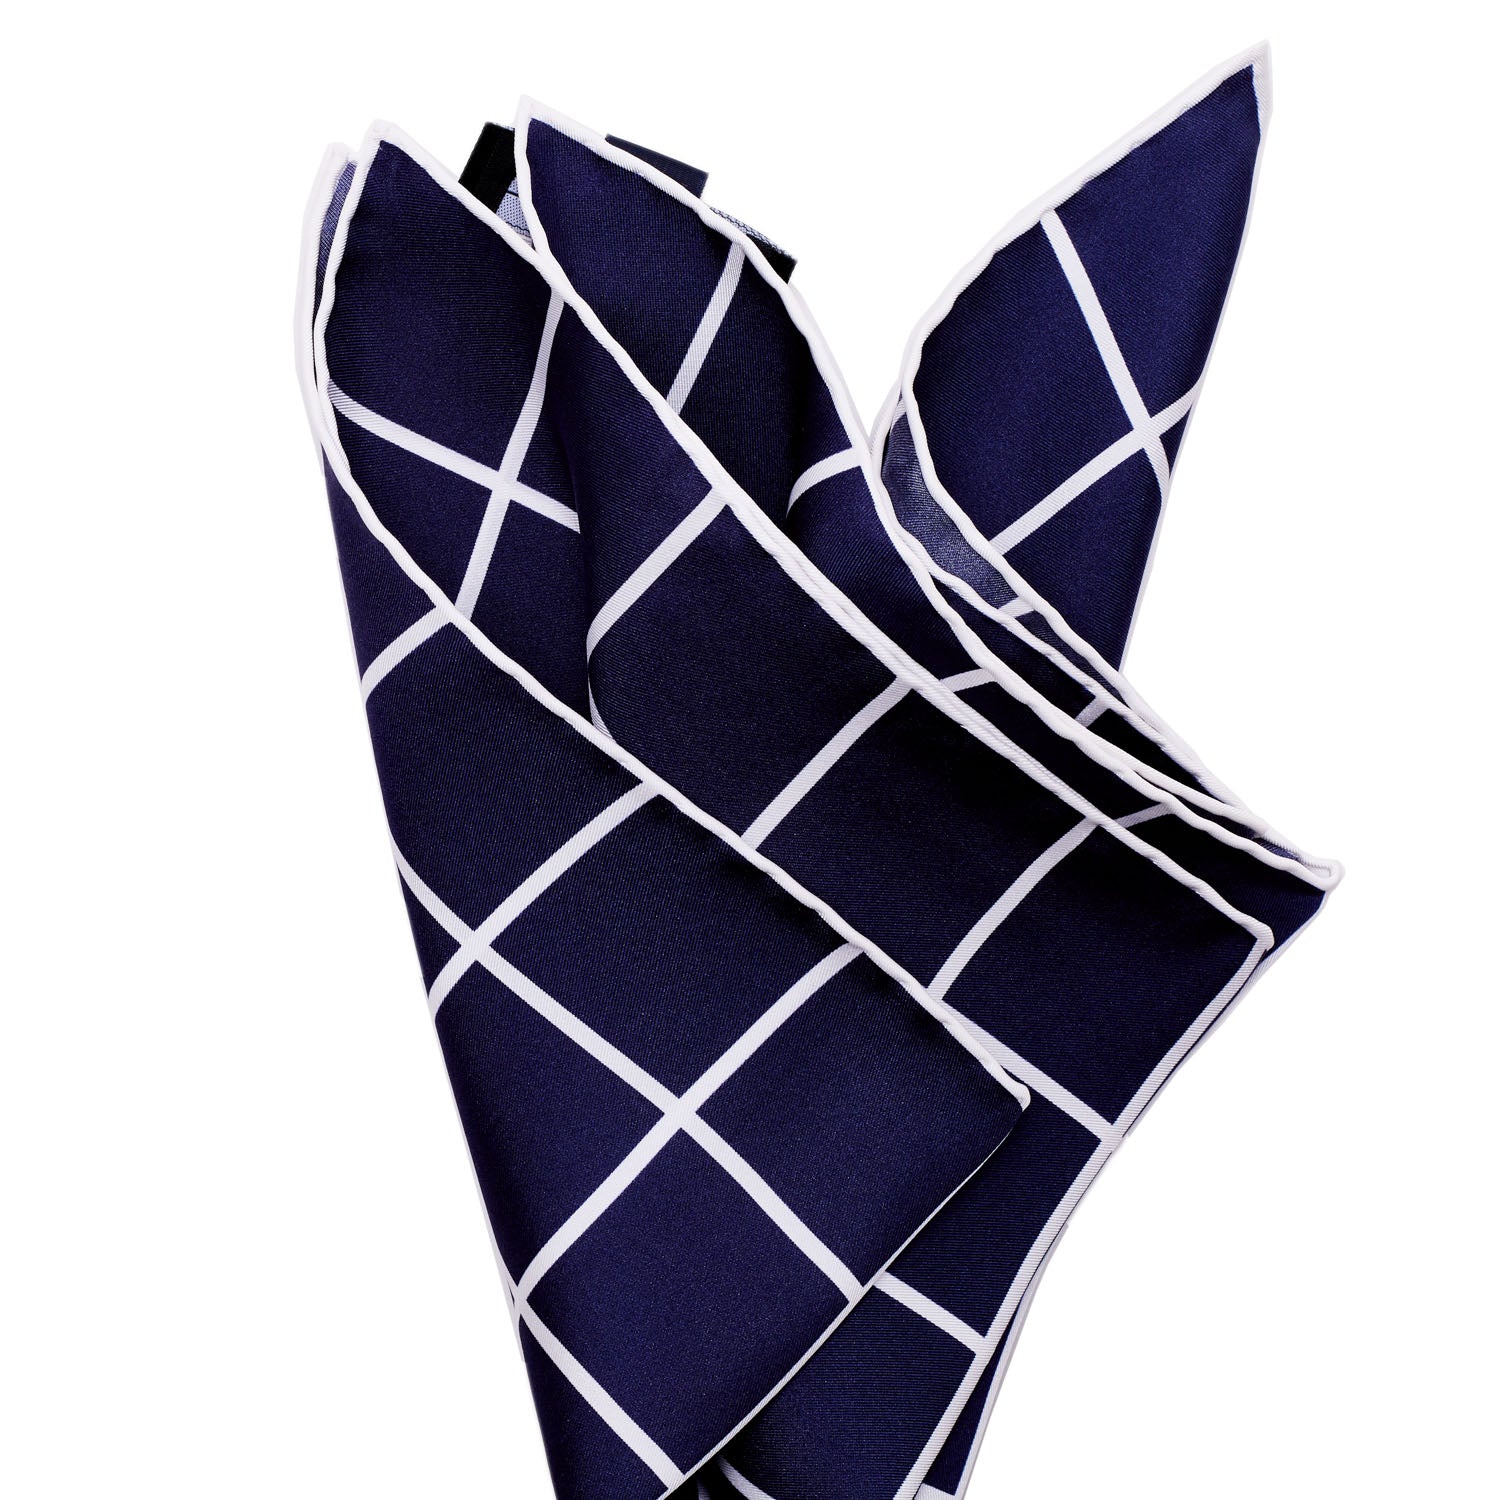 Sovereign Grade Prince of Wales Pocket Square, Navy/White